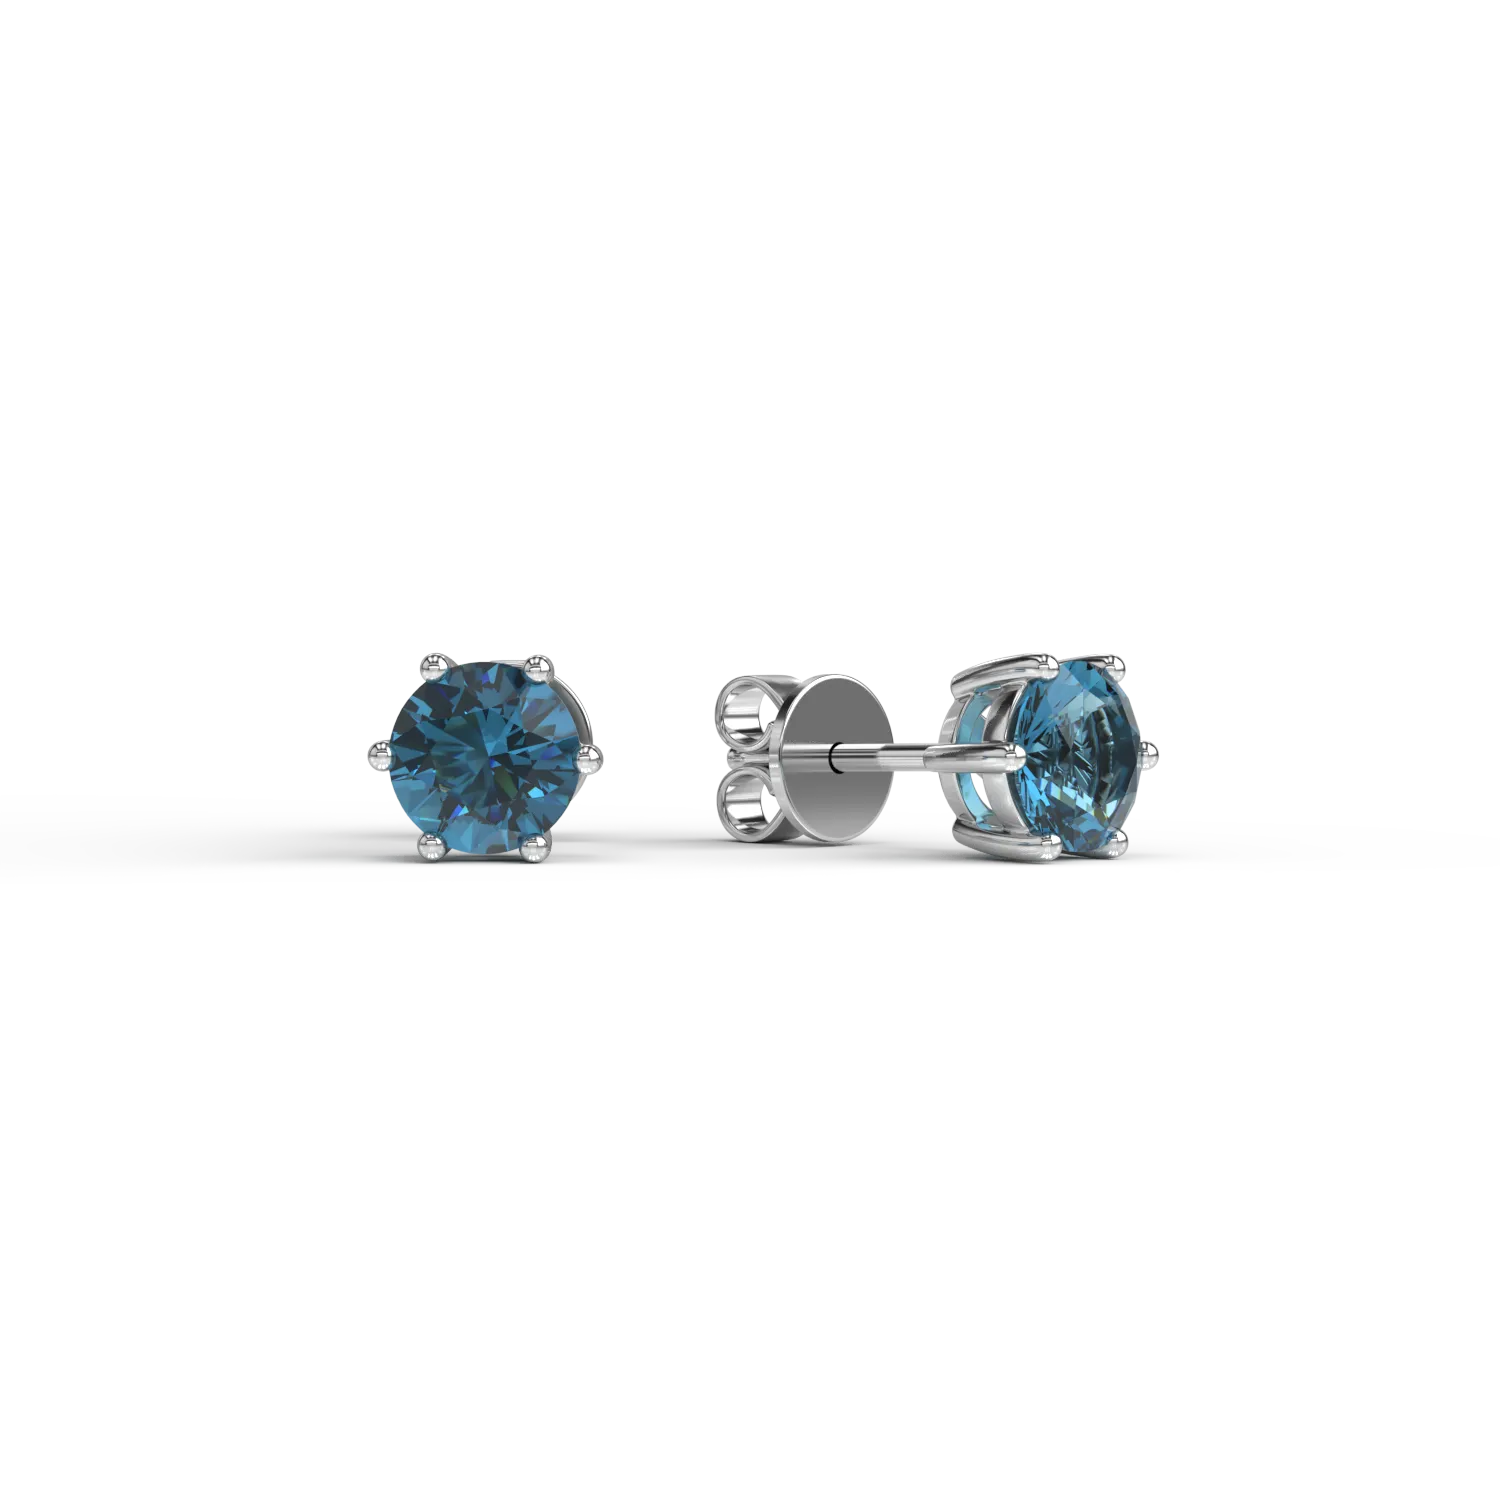 18K white gold earrings with 1.04ct blue diamonds